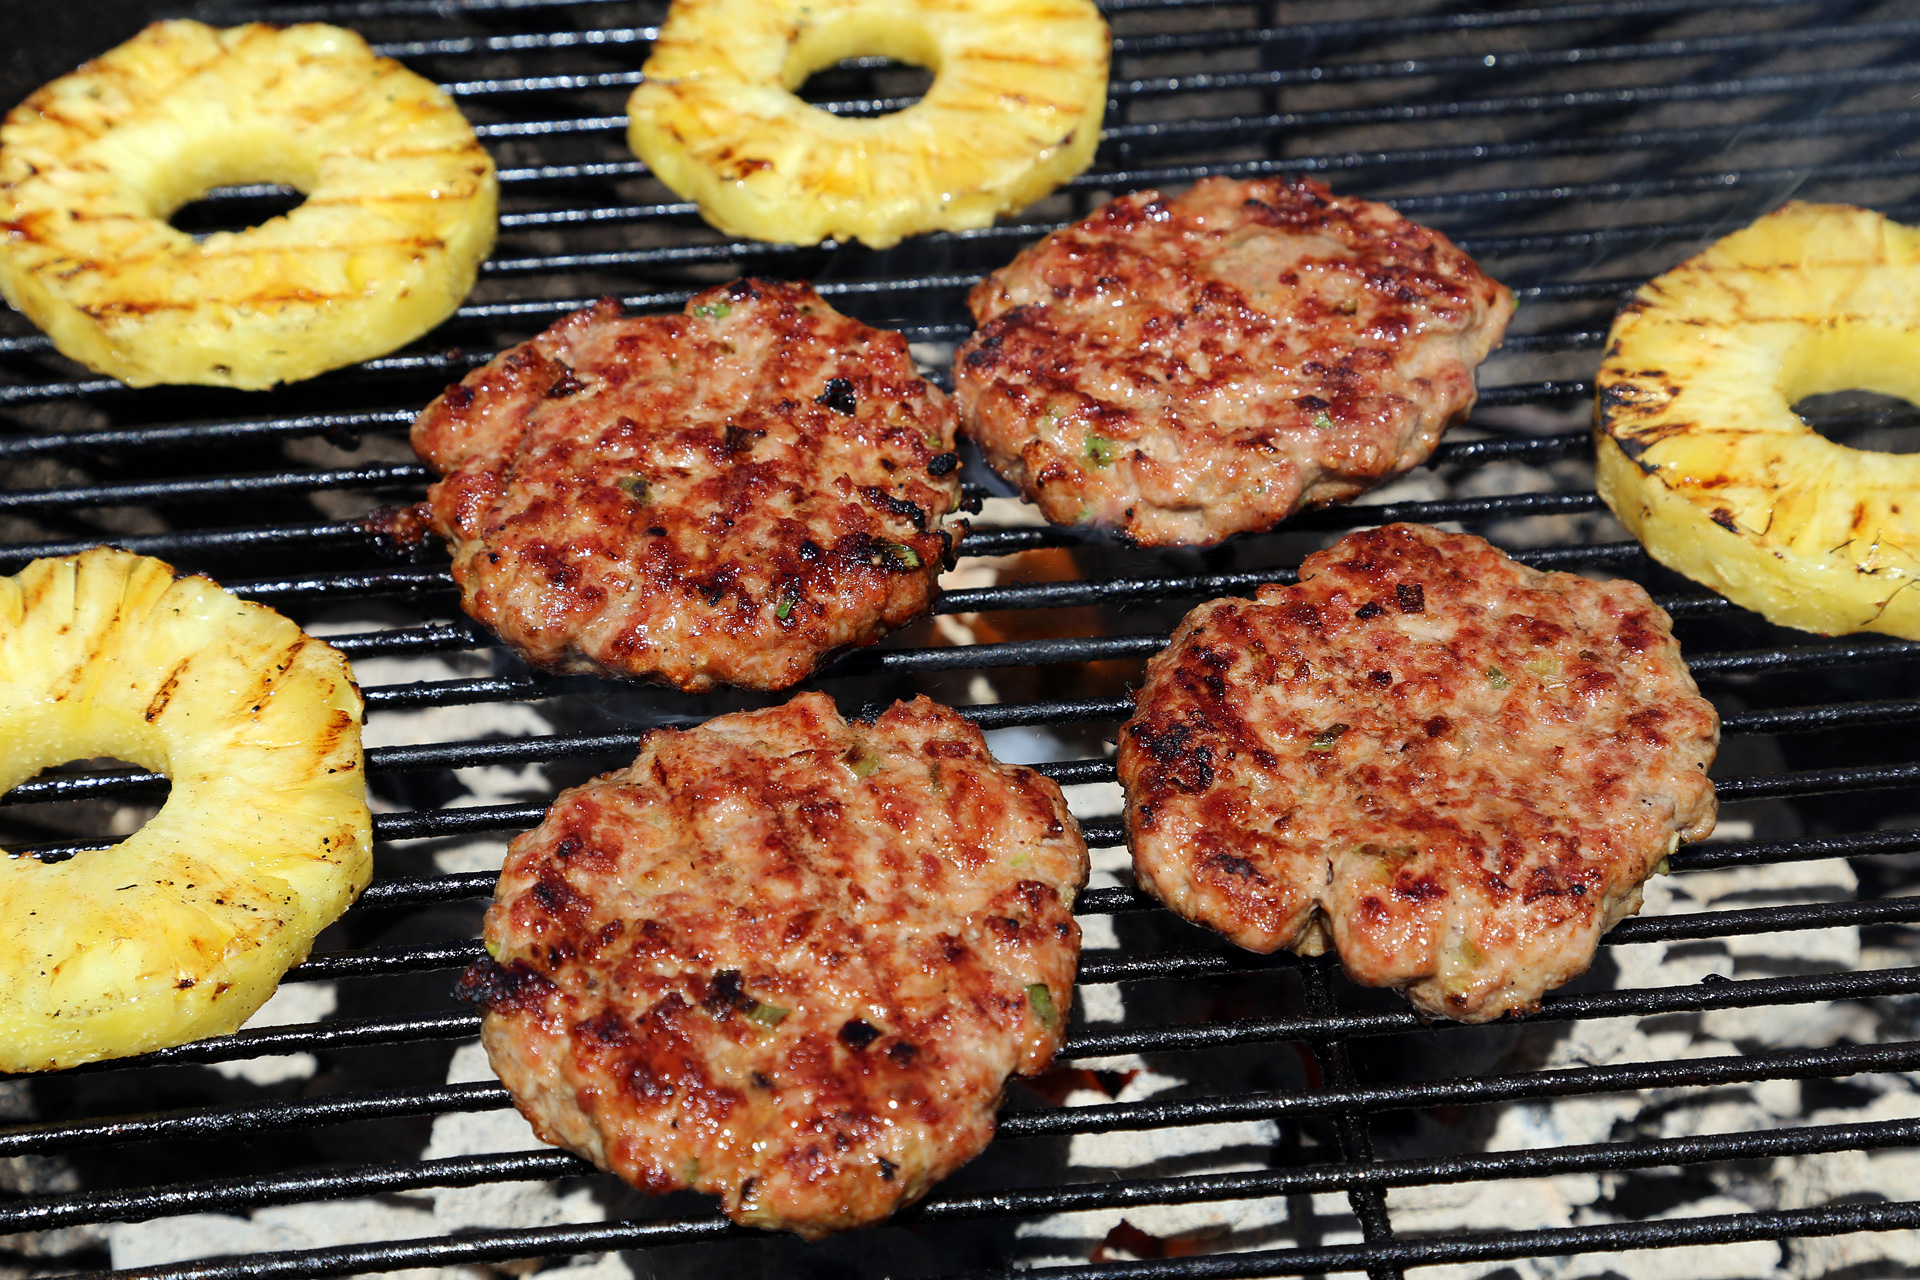 Grill the patties over the fire until nicely seared on both sides, turning occasionally, about 4 minutes on each side. During the last 4 minutes of cooking, add the pineapple slices. Grill, turning once, until nicely seared.